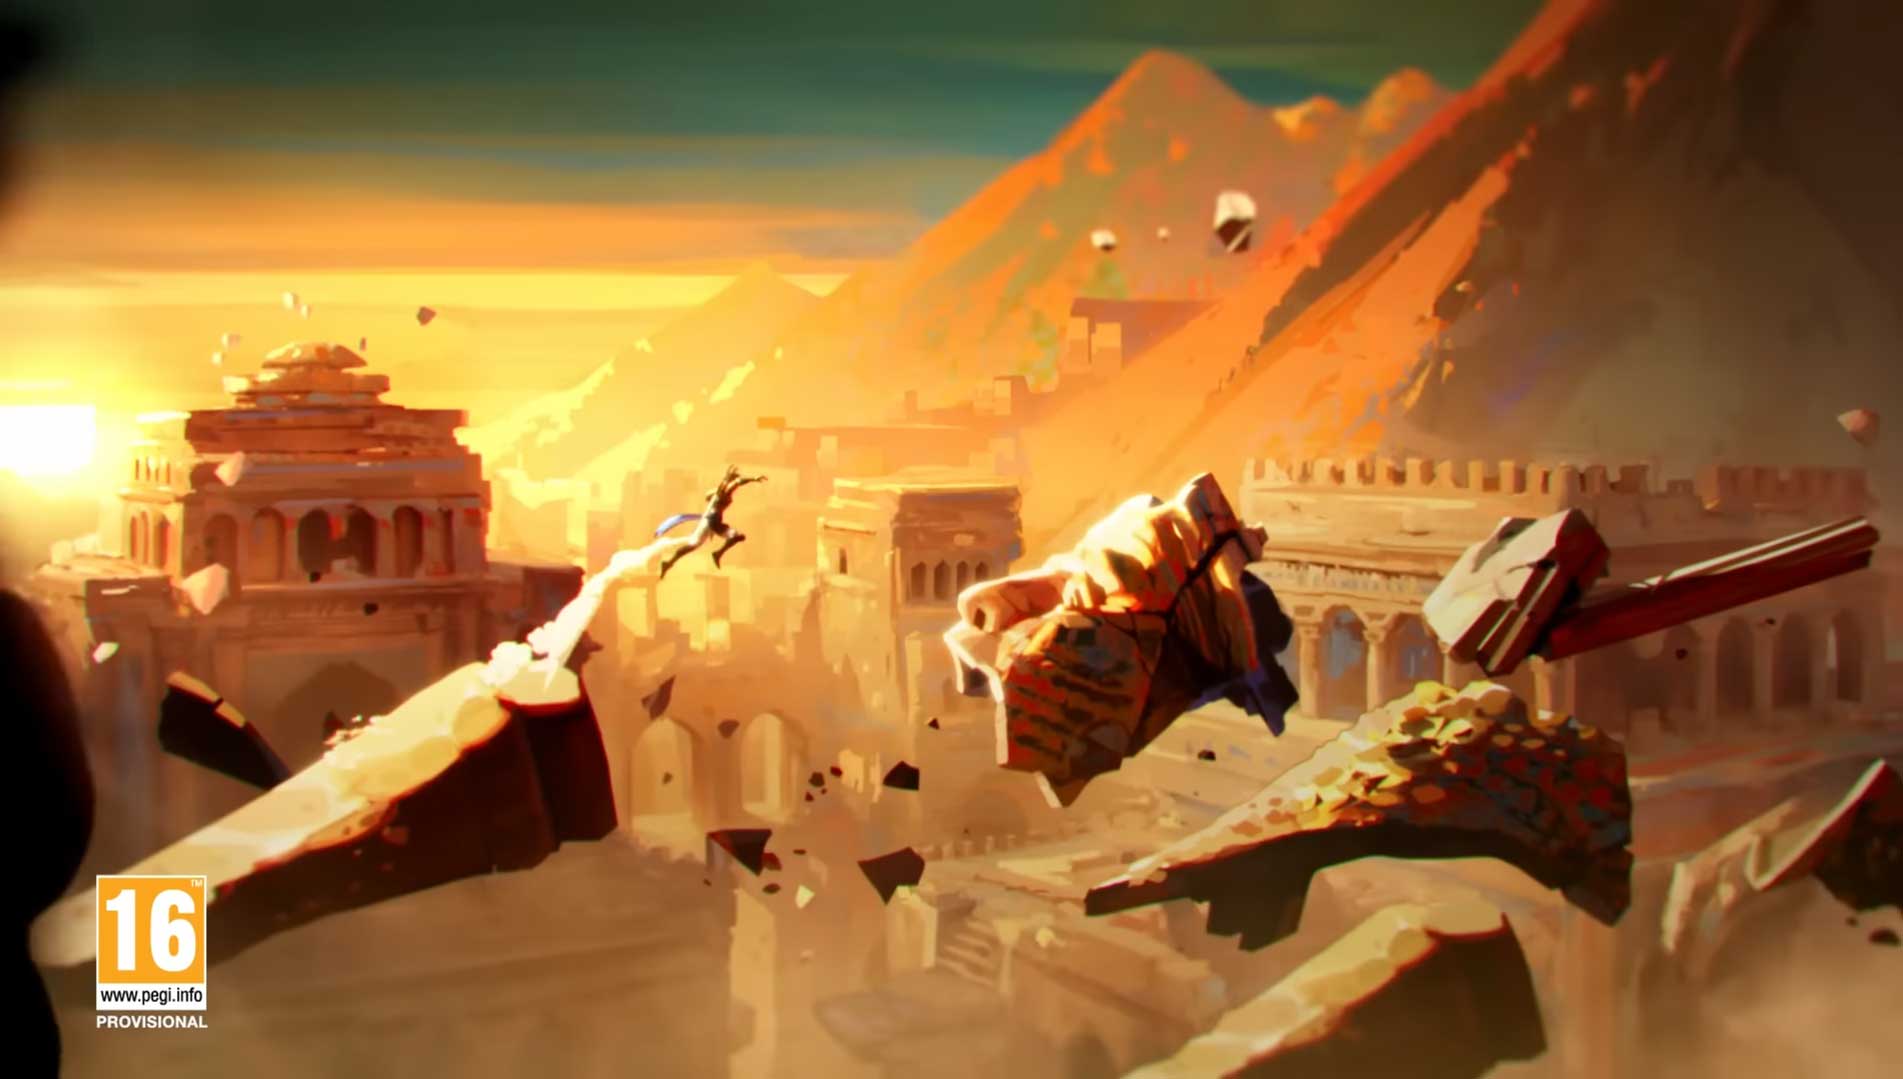 Prince of Persia The Lost Crown - Reveal Animated Trailer